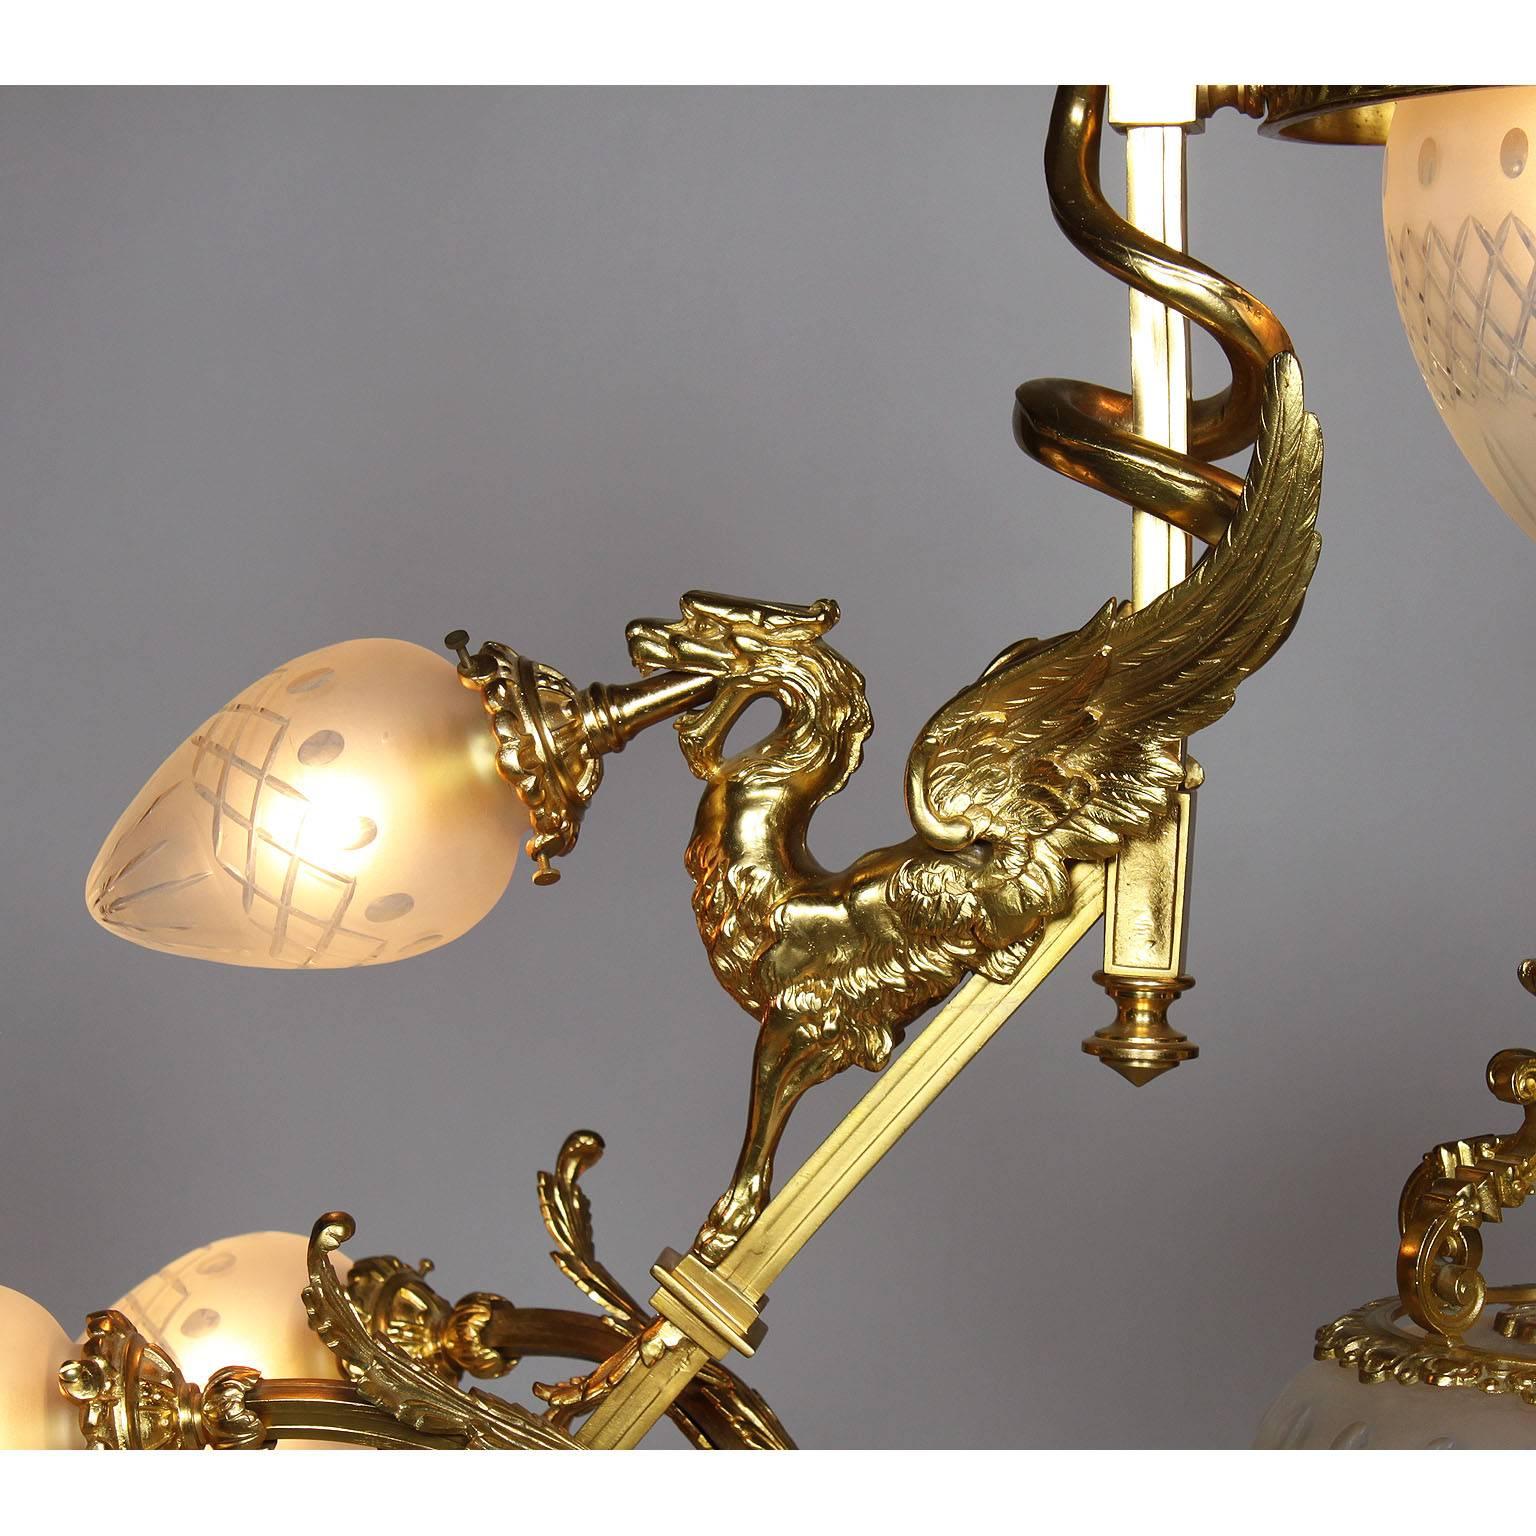 French Belle Epoque 19th-20th Century Neoclassical Style Gilt-Bronze Chandelier For Sale 2